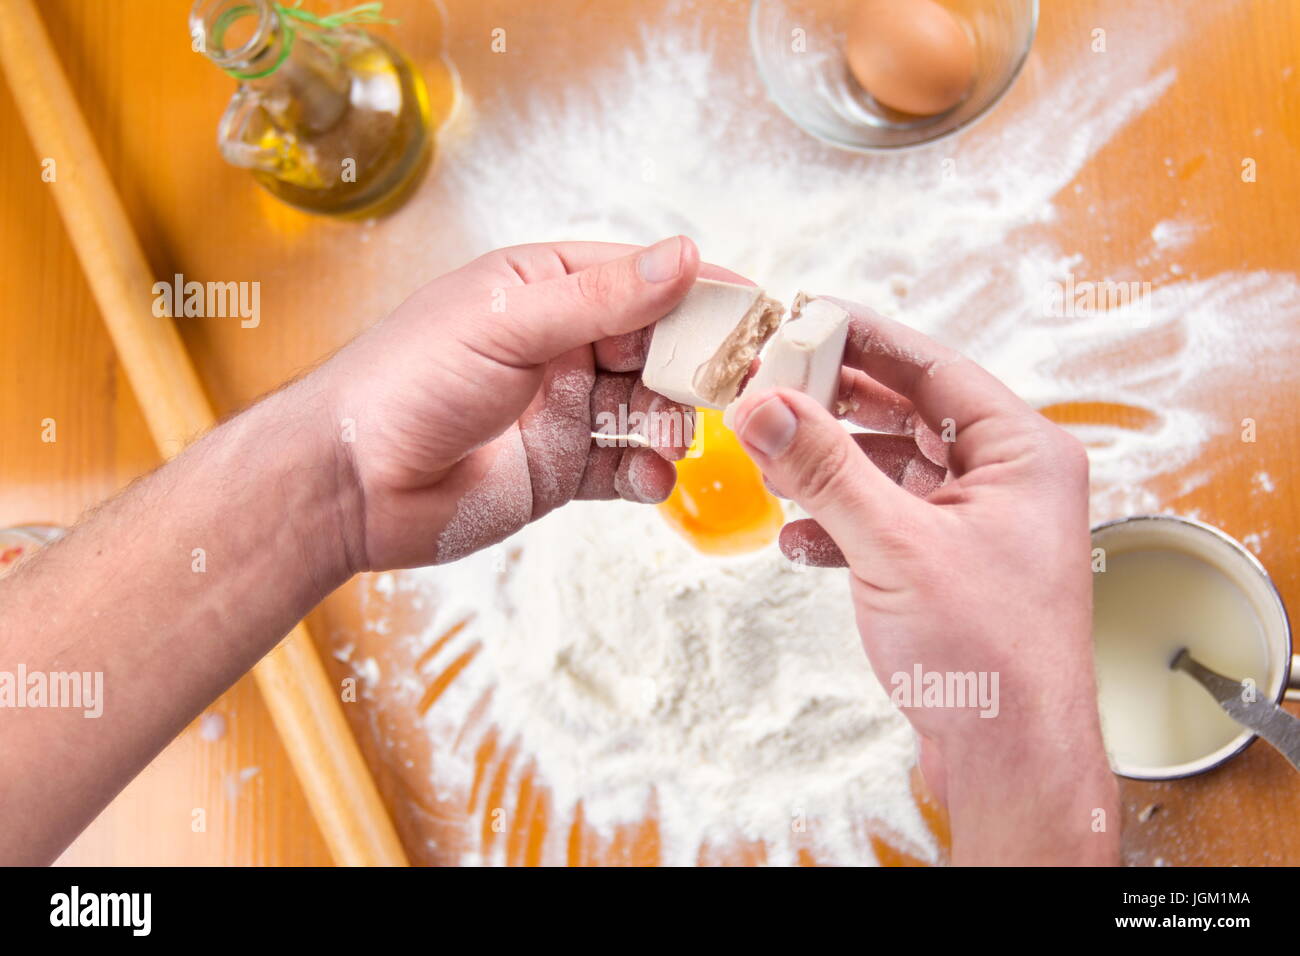 Man spiting yeast in dough making process Stock Photo